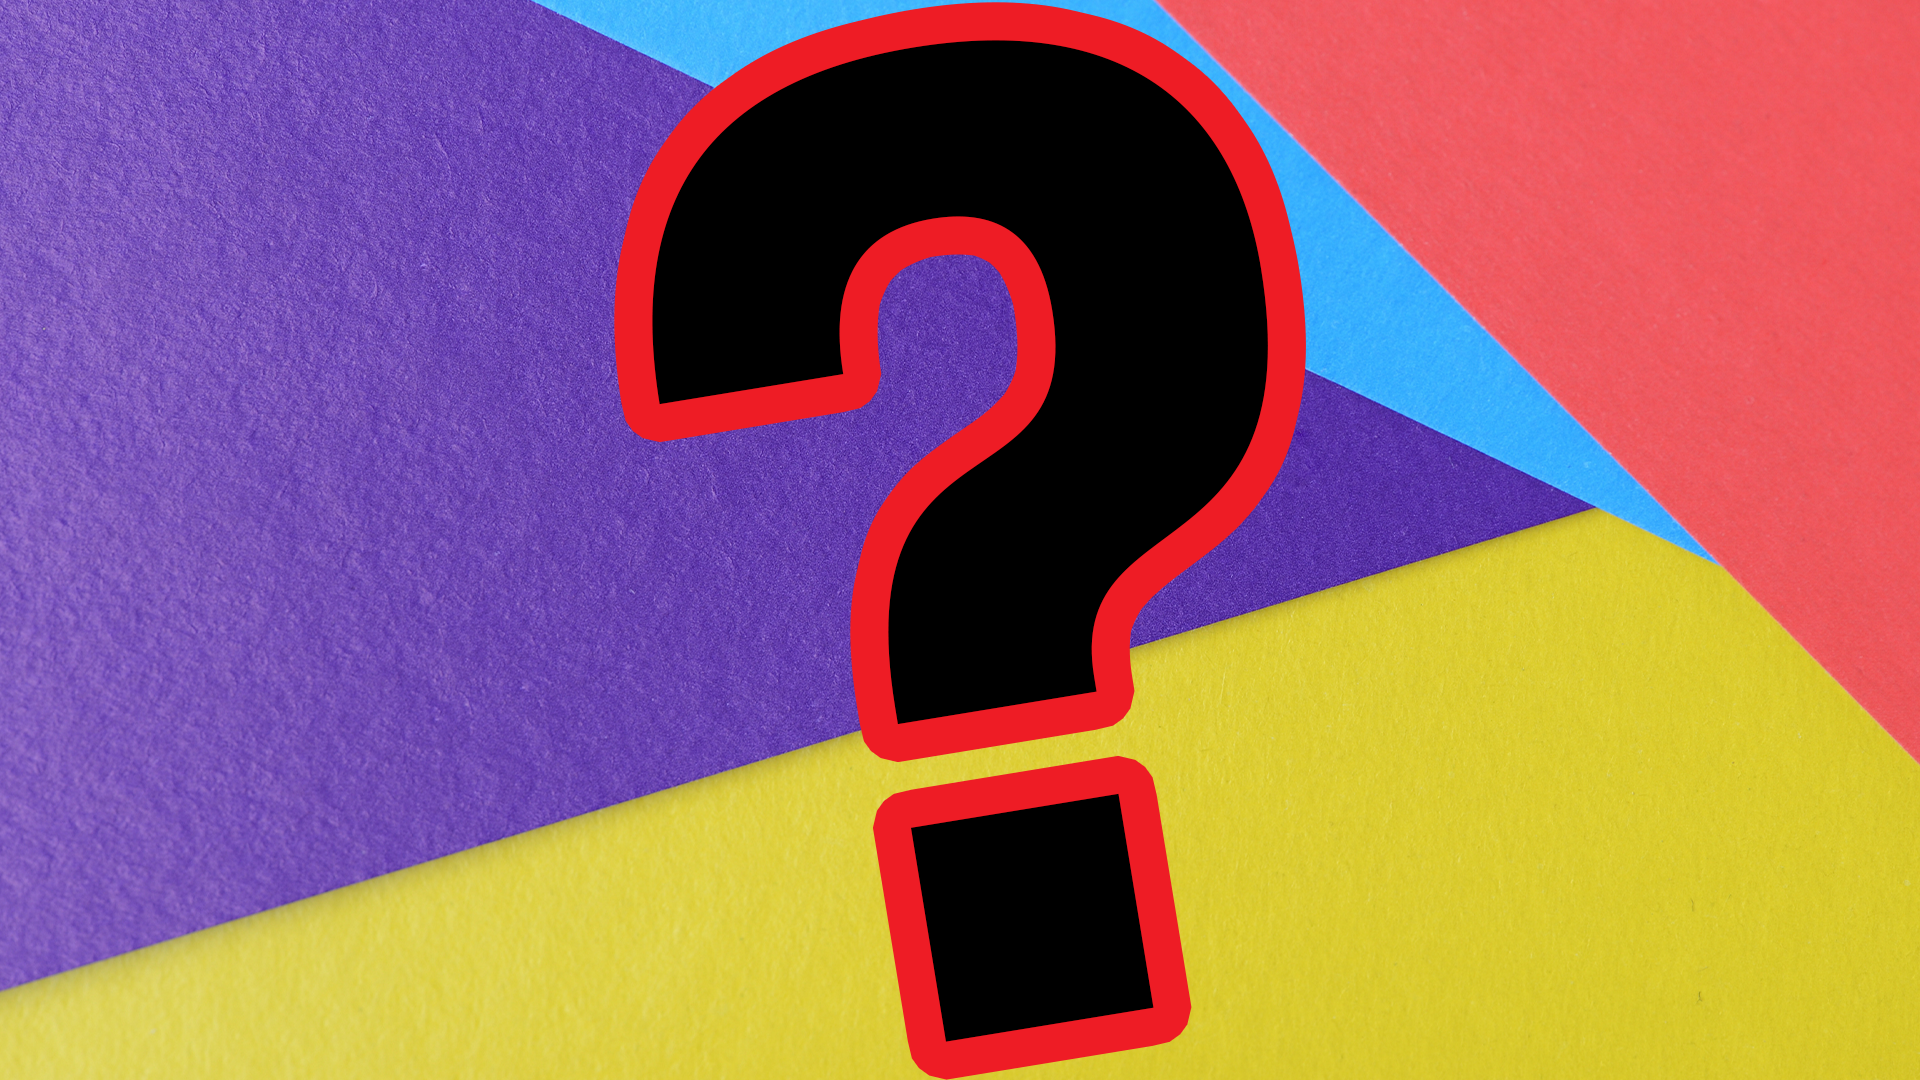 Colourful background and question mark